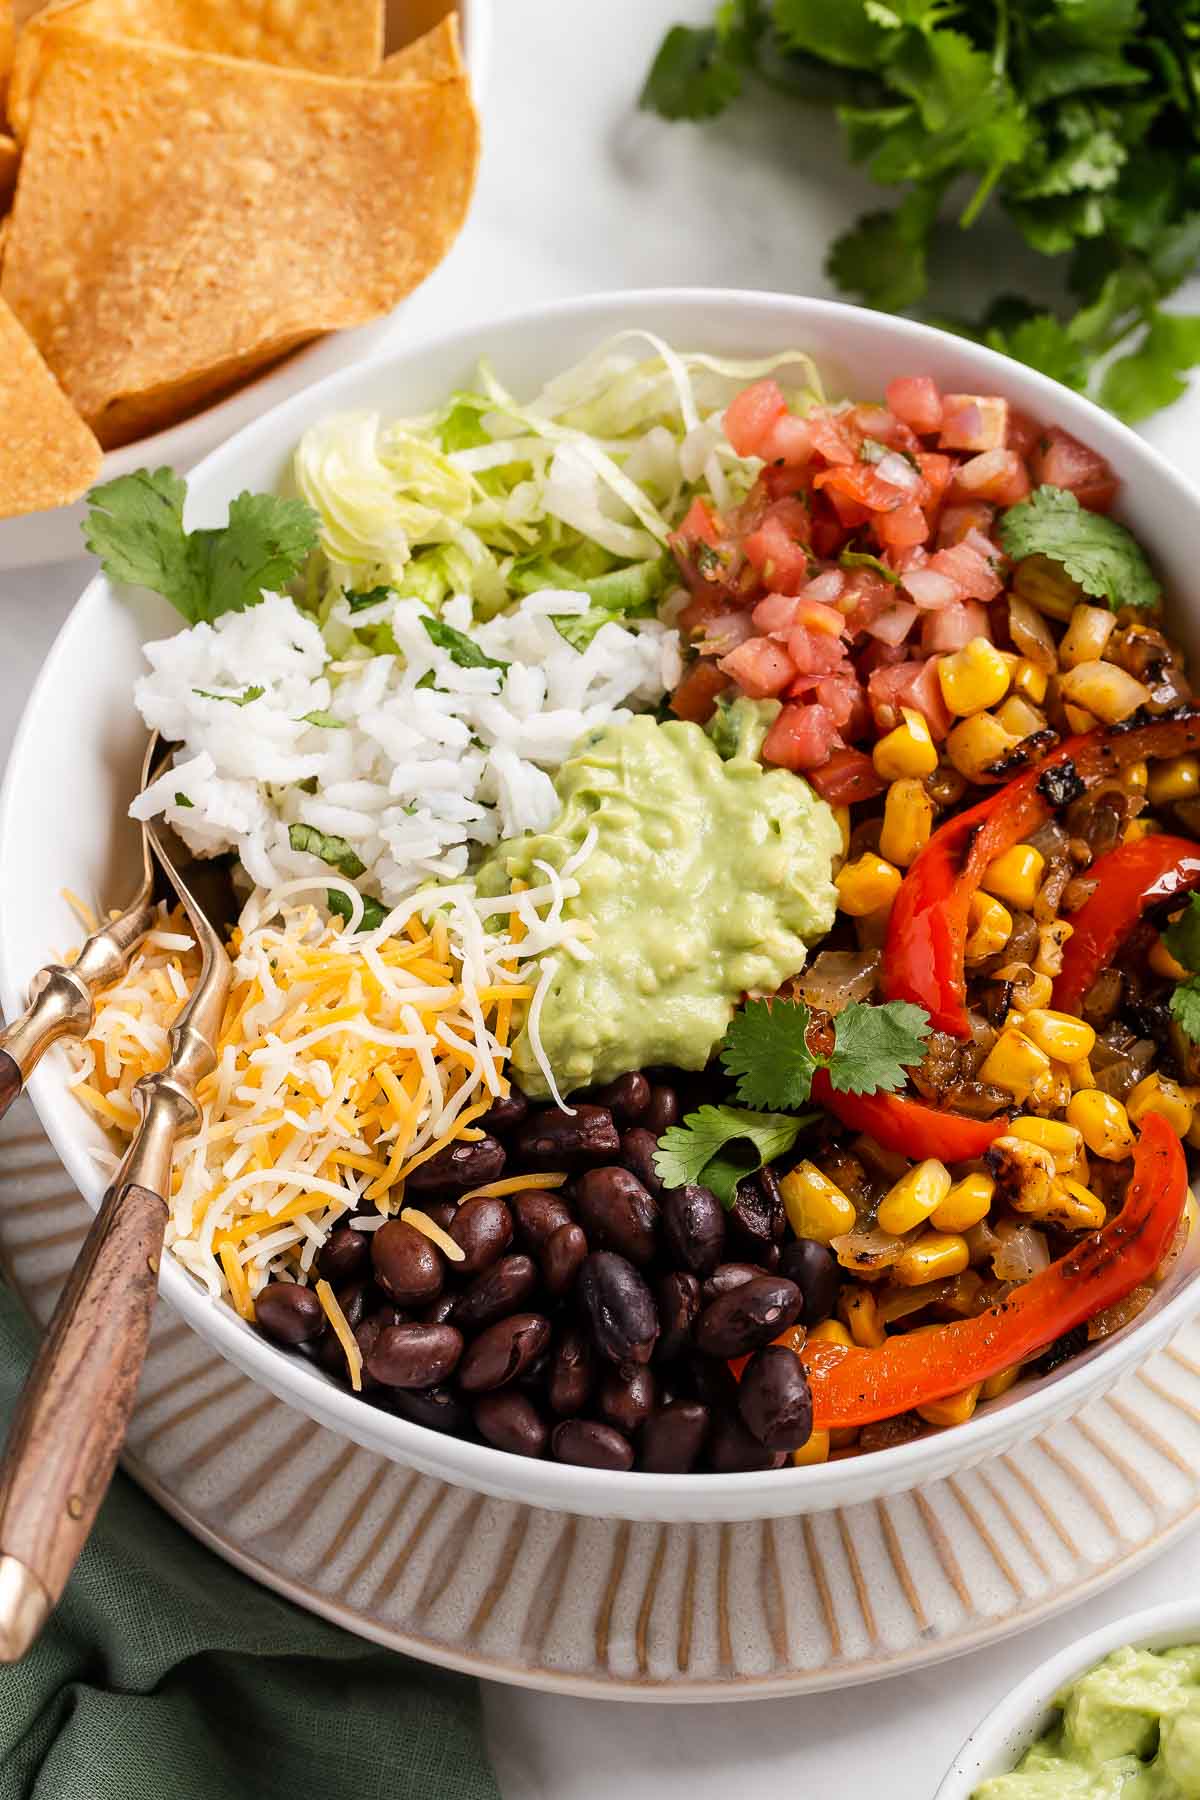 Colorful vegan burrito bowl made with black beans and bell peppers.